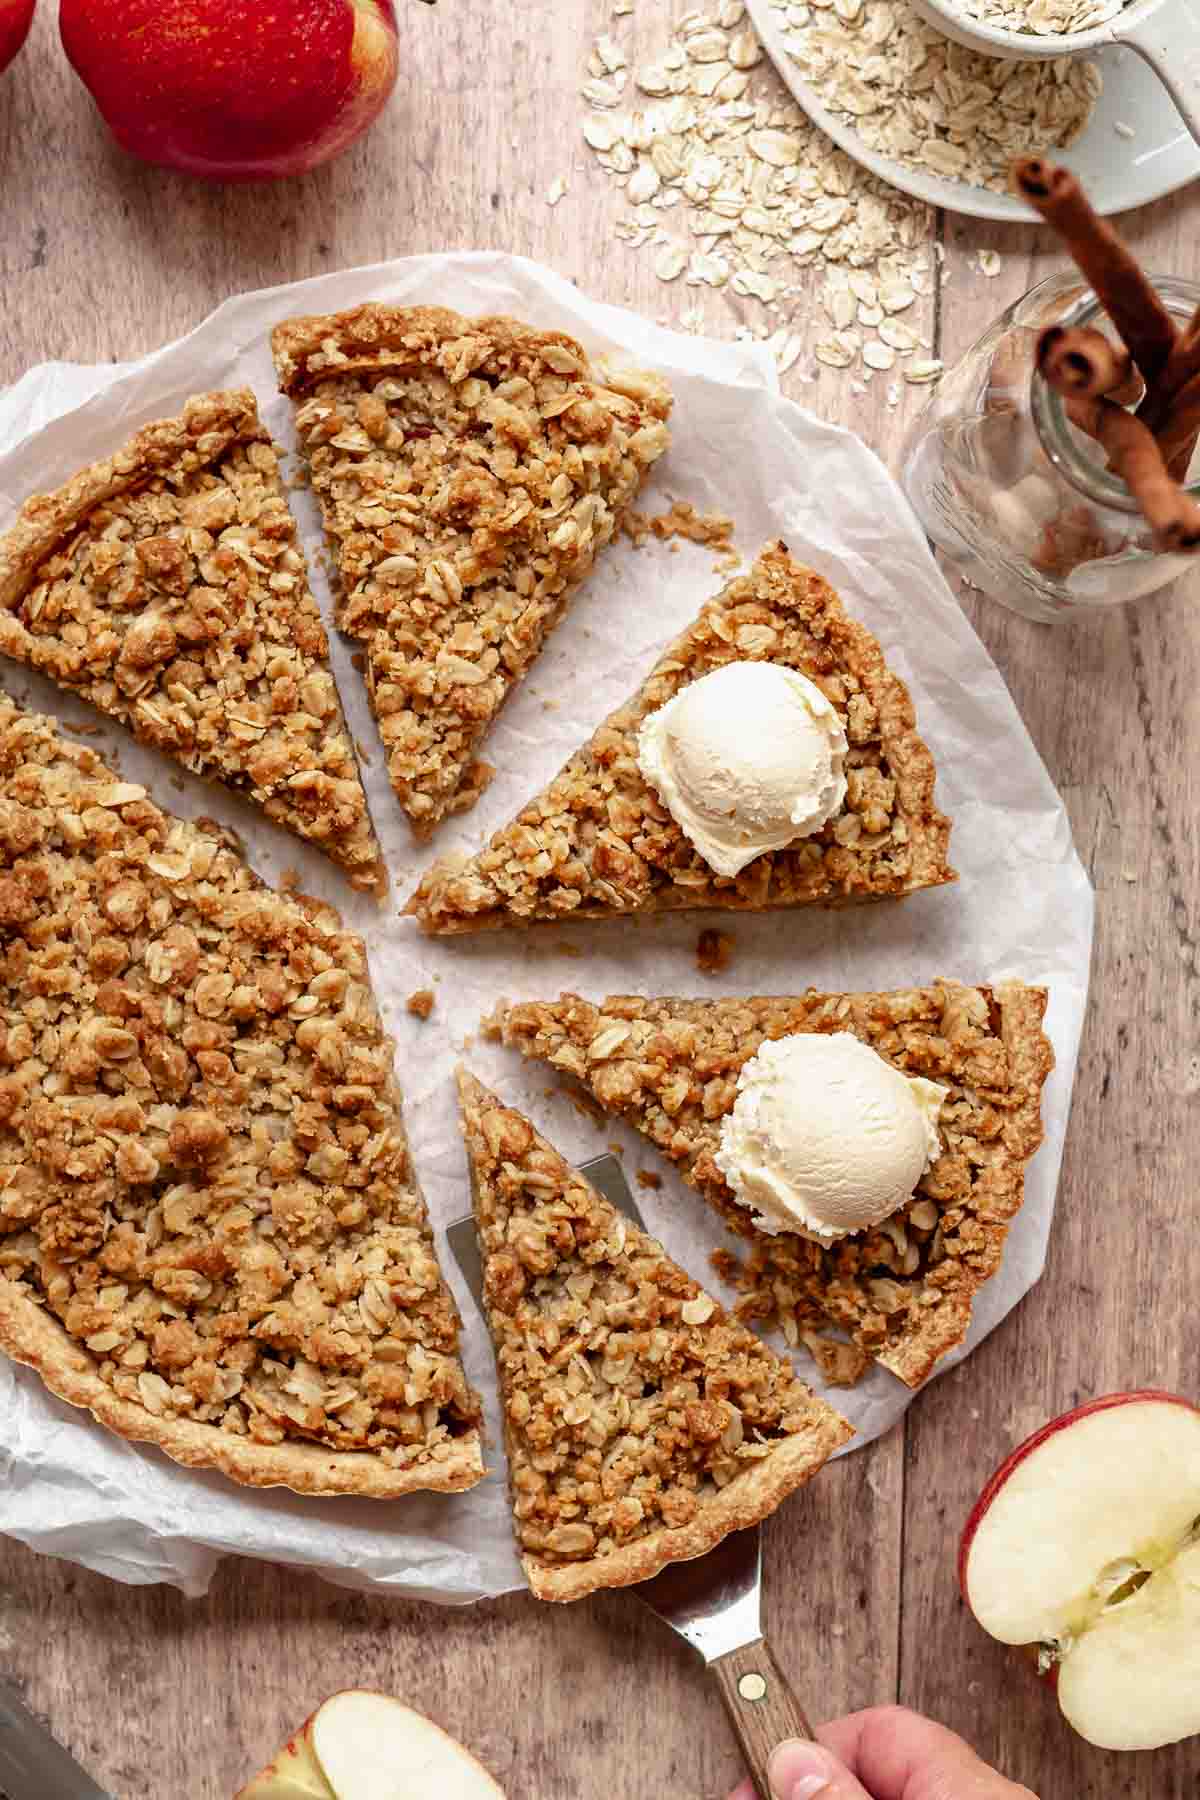 Sliced apple crumble tart with a scoop of ice cream on two of the slices.